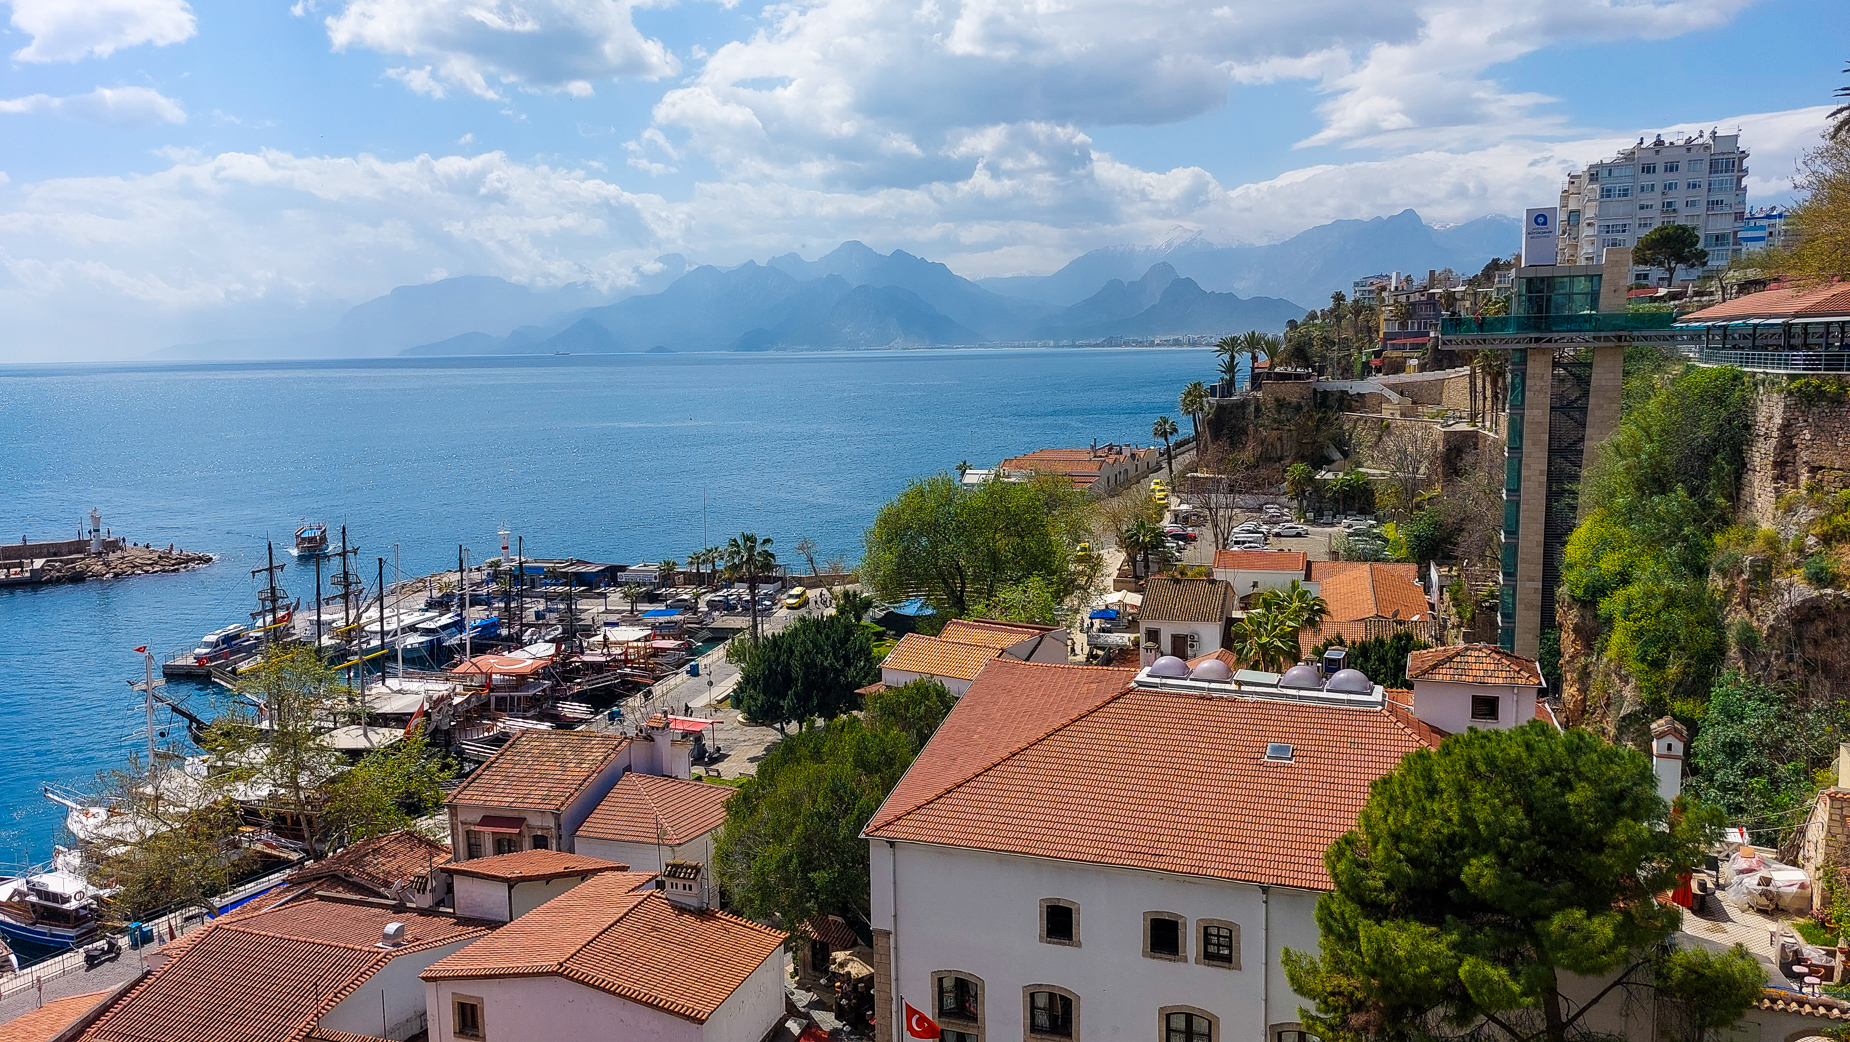 <span  class="uc_style_uc_tiles_grid_image_elementor_uc_items_attribute_title" style="color:#ffffff;">City of 'Antalya' - much more beautify than expected!</span>